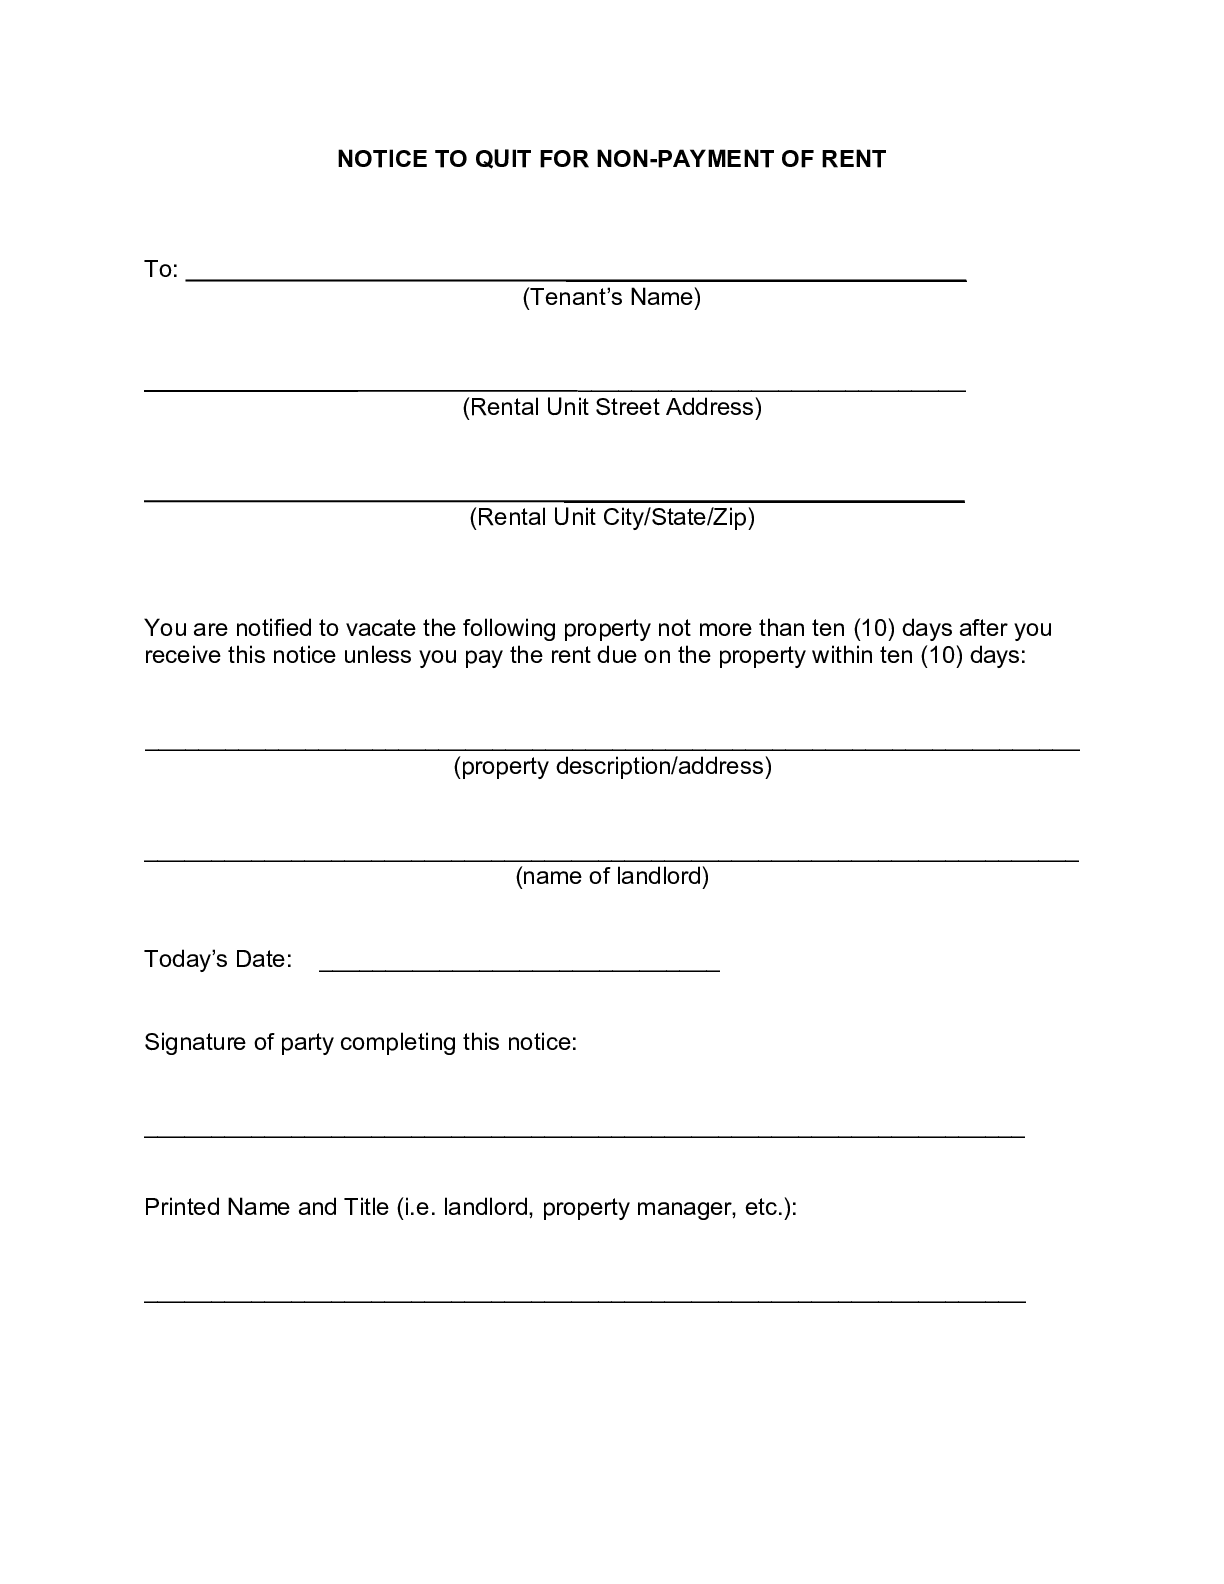 free-indiana-eviction-notice-form-2020-notice-to-vacate-pdf